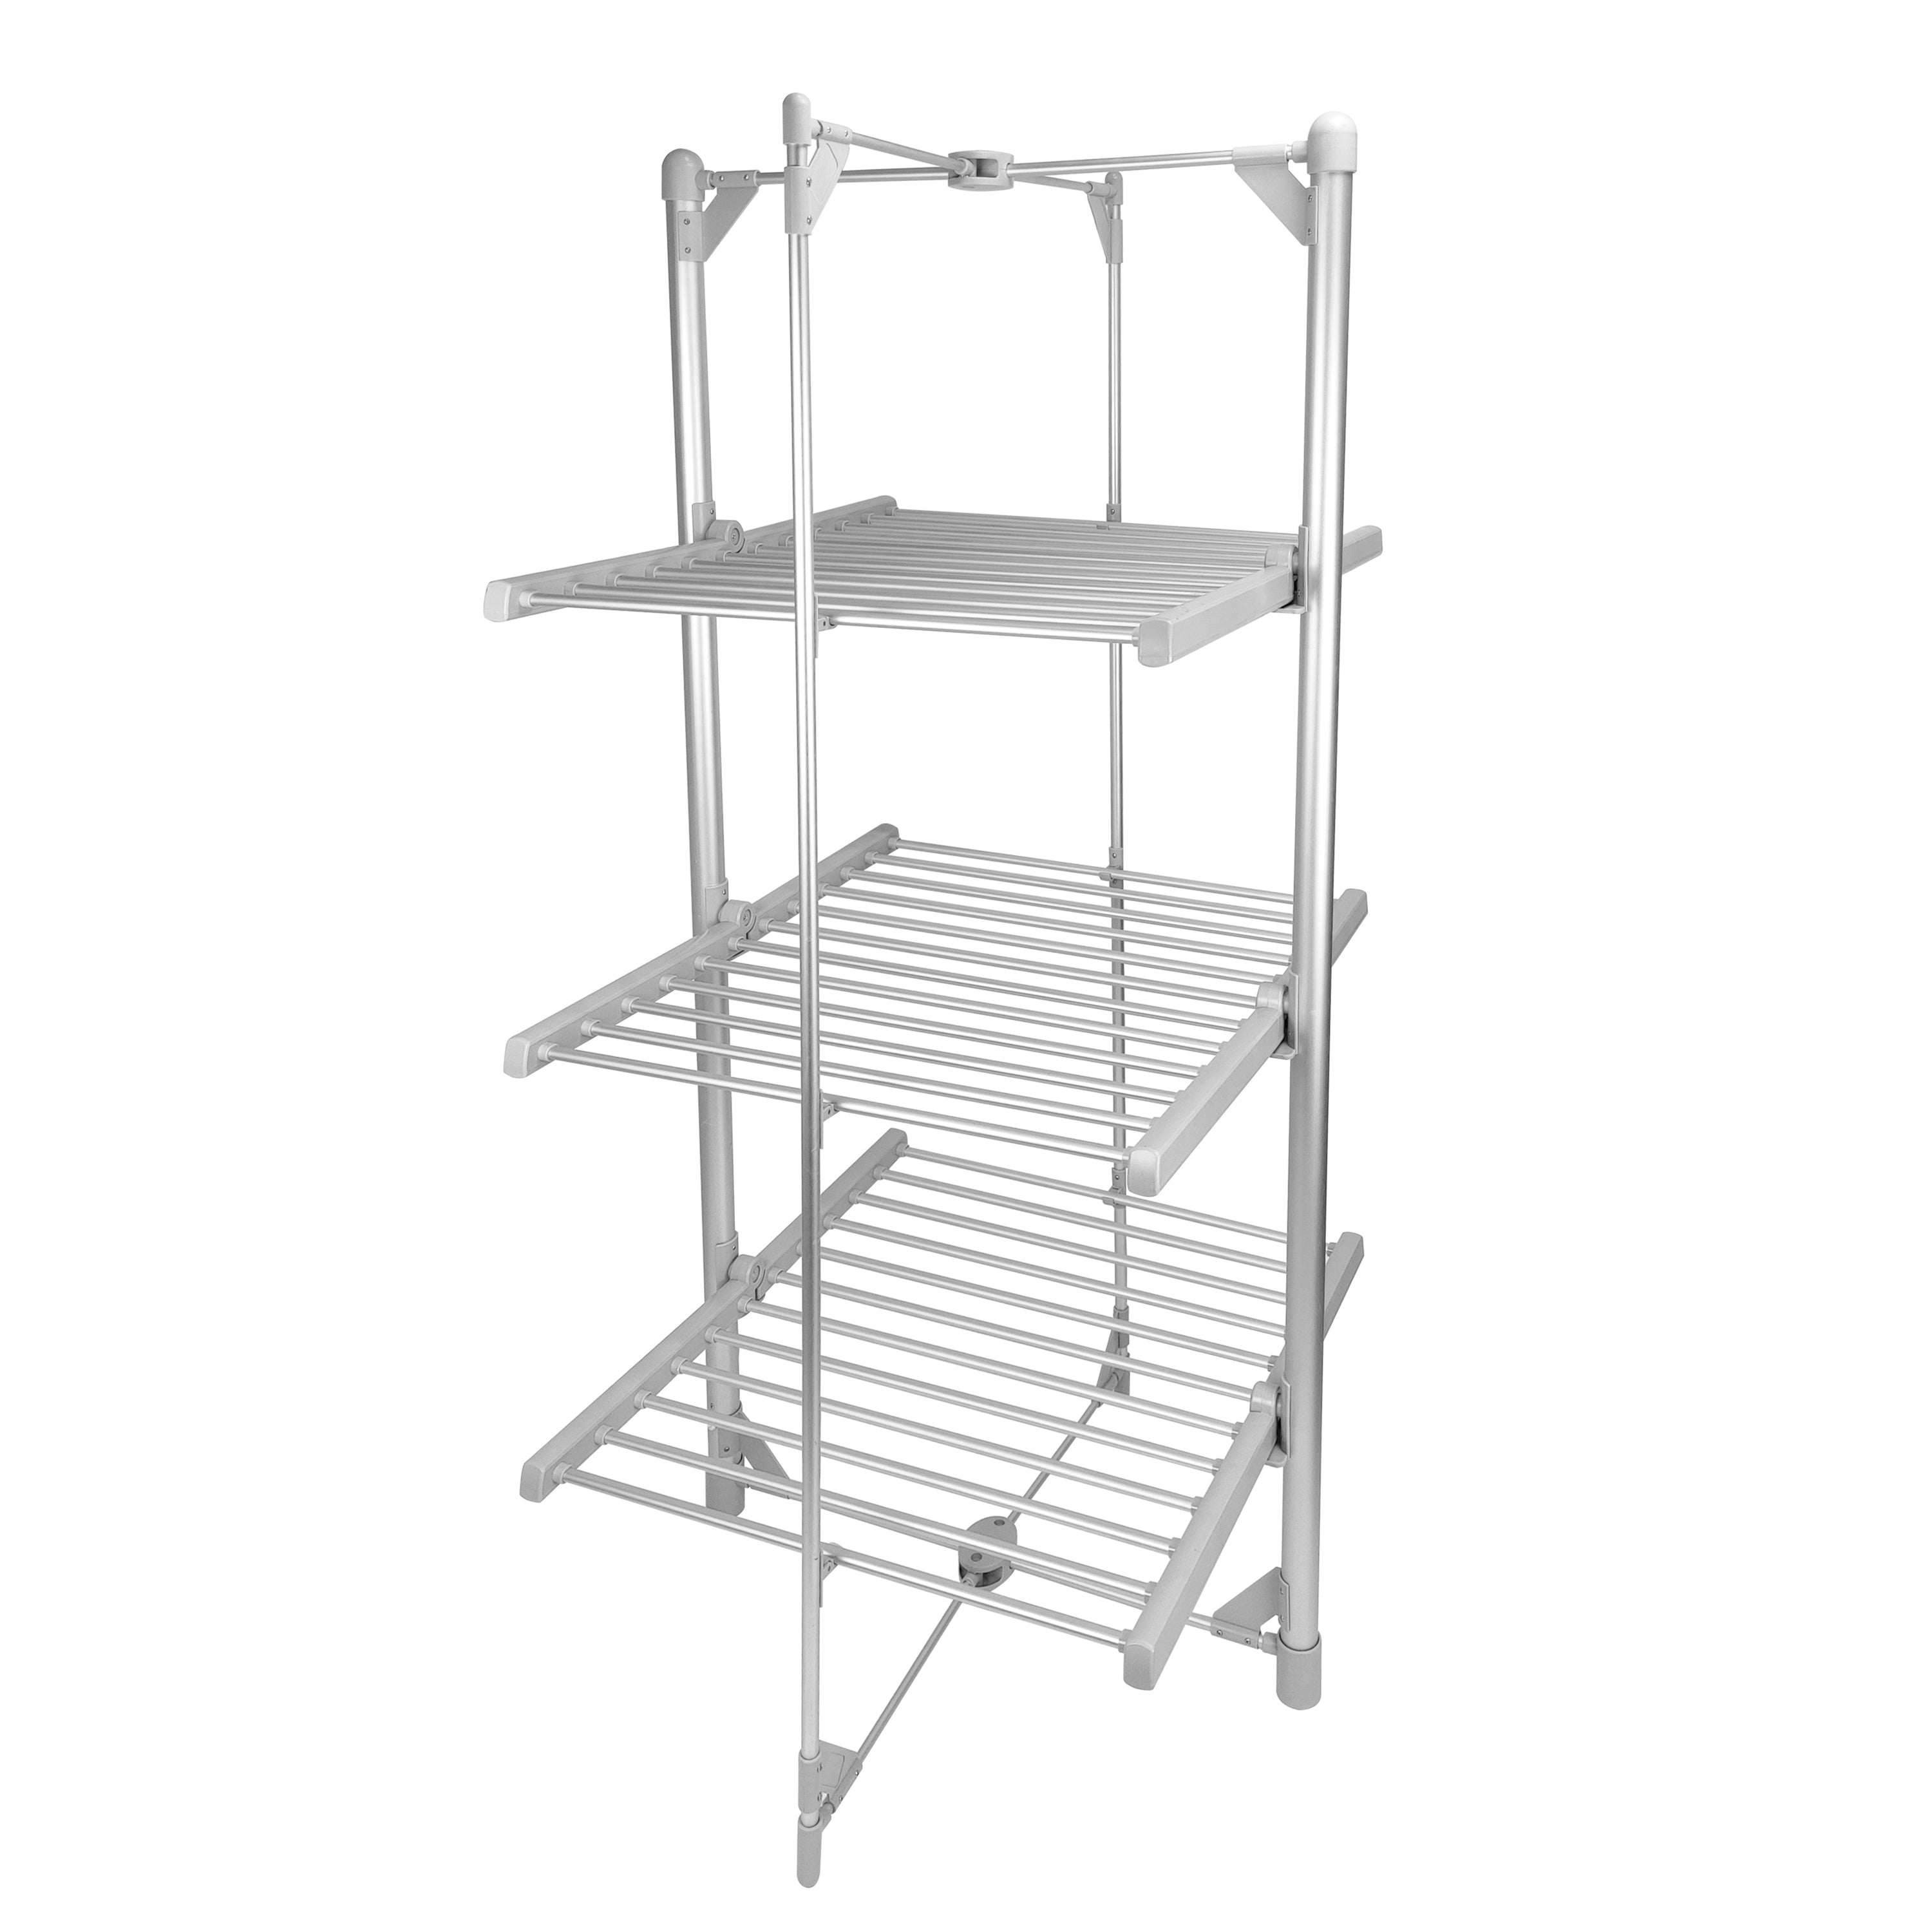 AMOS 3-Tier Heated Electric Foldable Clothes Airer With Cover